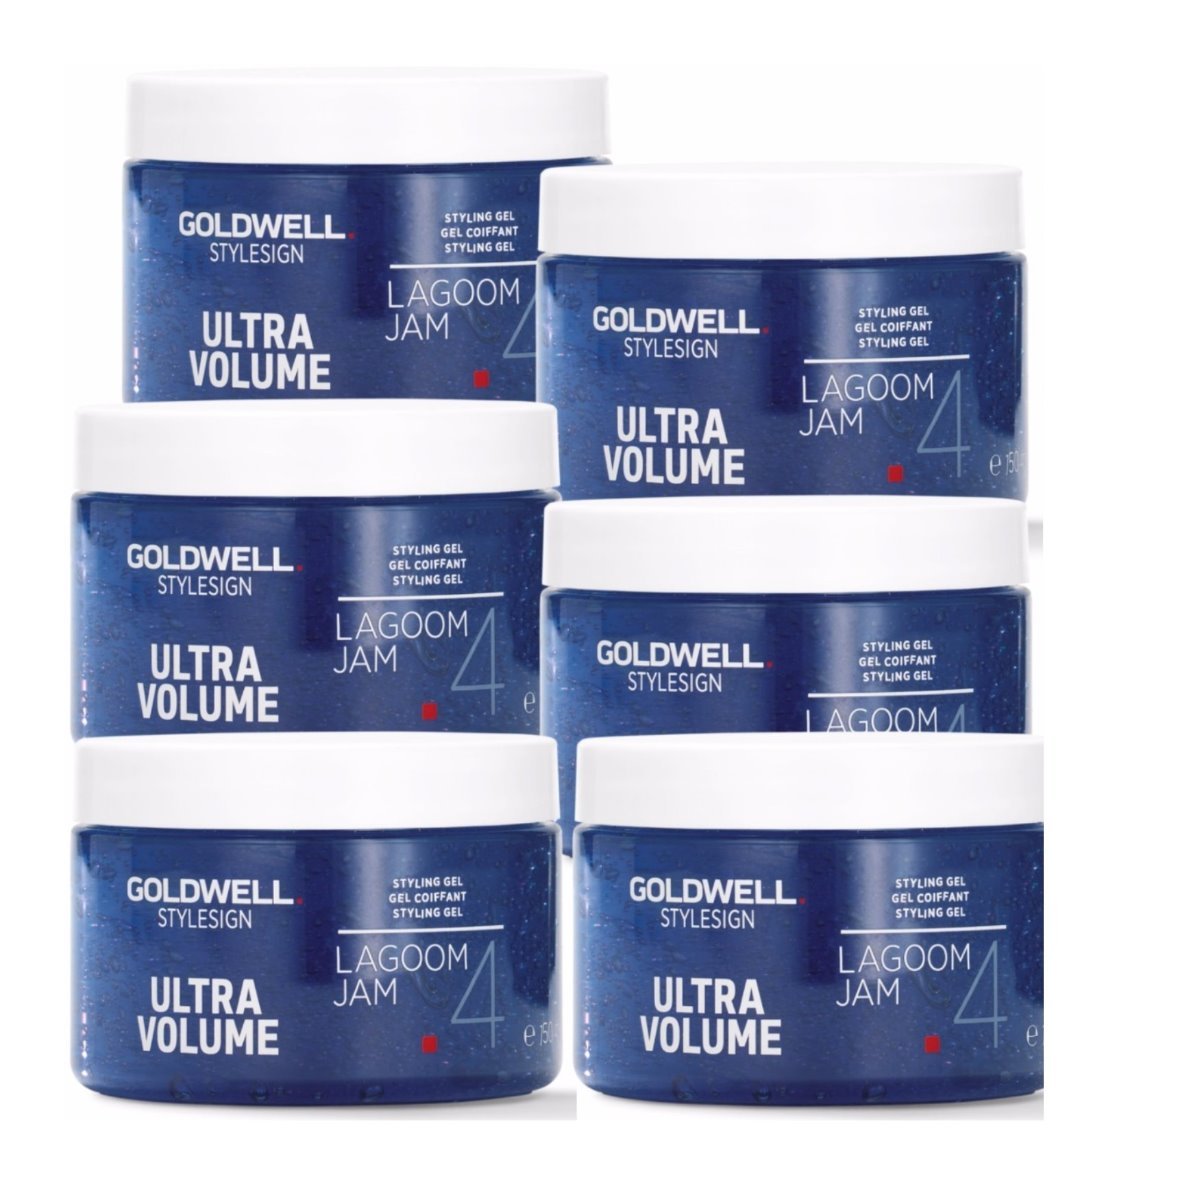 iaahhaircare,Goldwell 6 Pk Lagoom Jam Ultra Volume Styling Gel 150 ml,Styling Products,Goldwell Stylesign